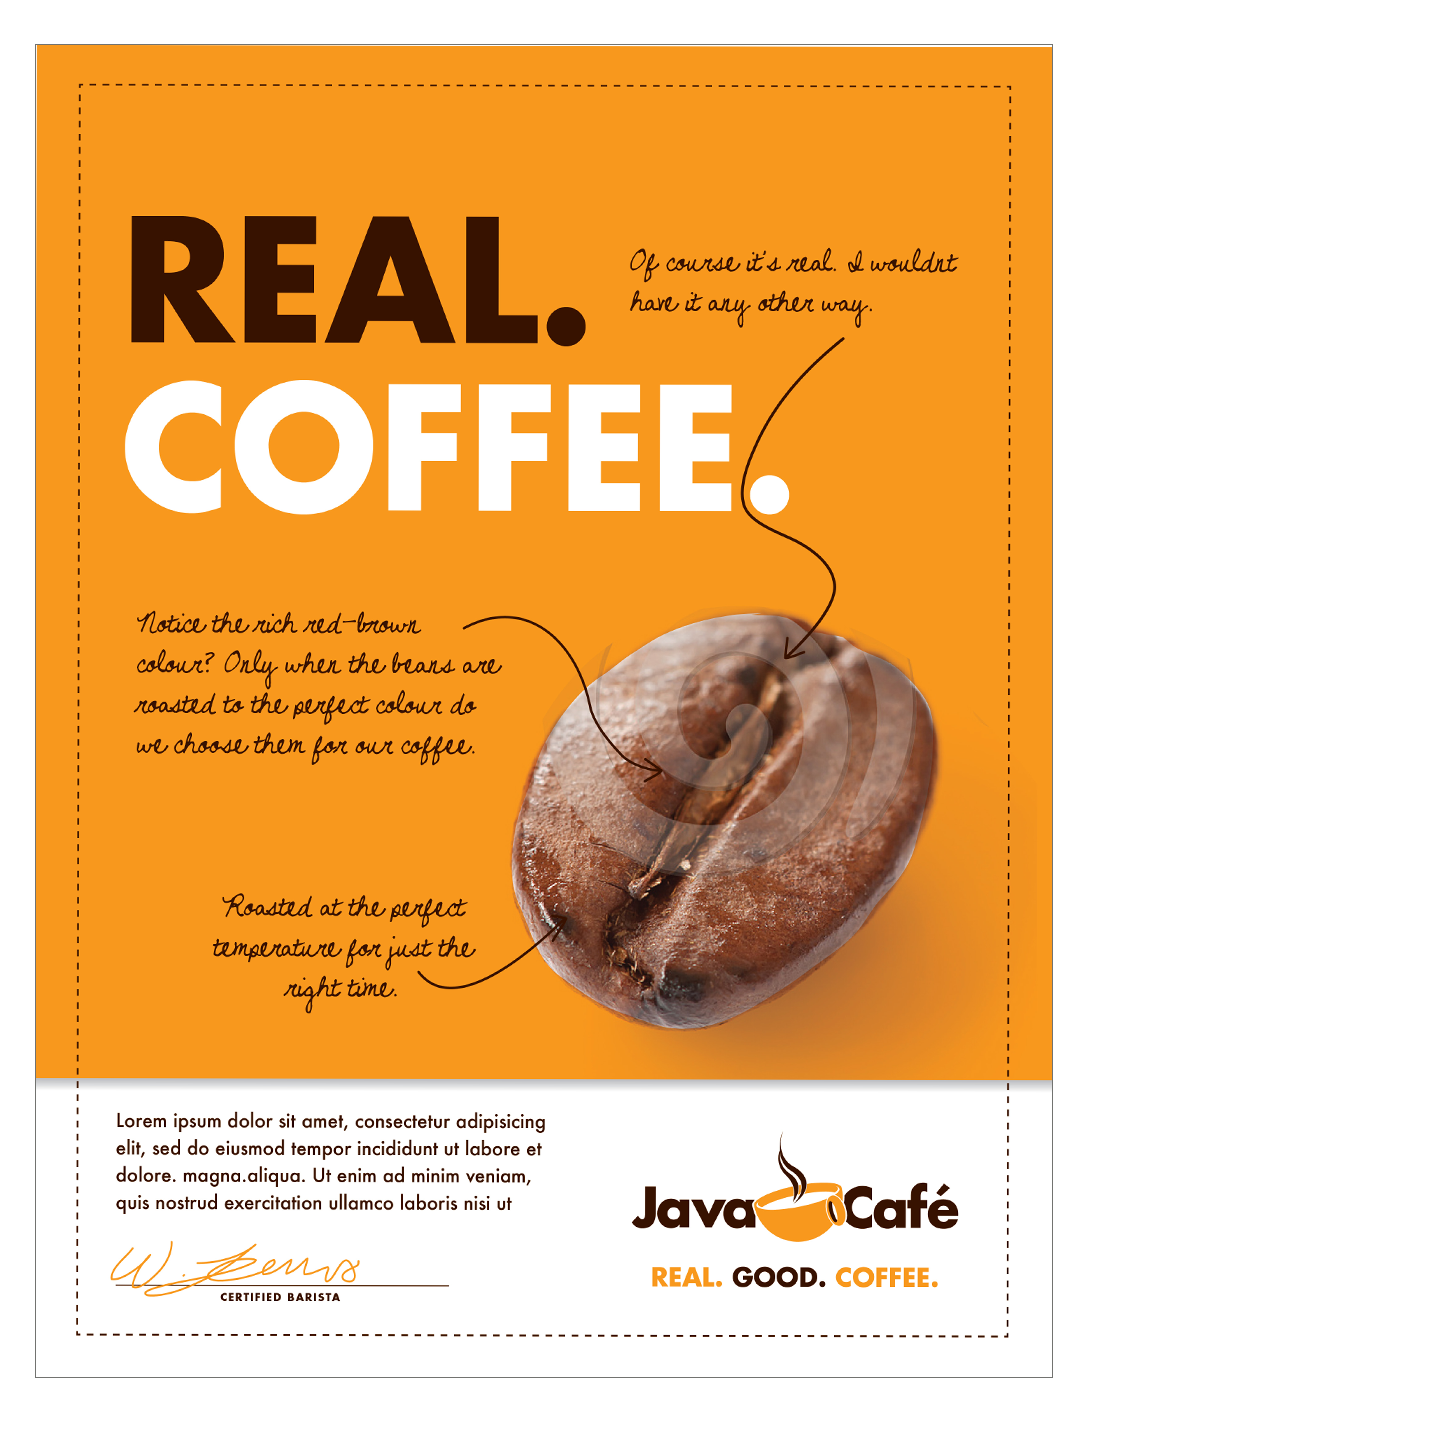 stir-images-shell-javacafe-ad2.png